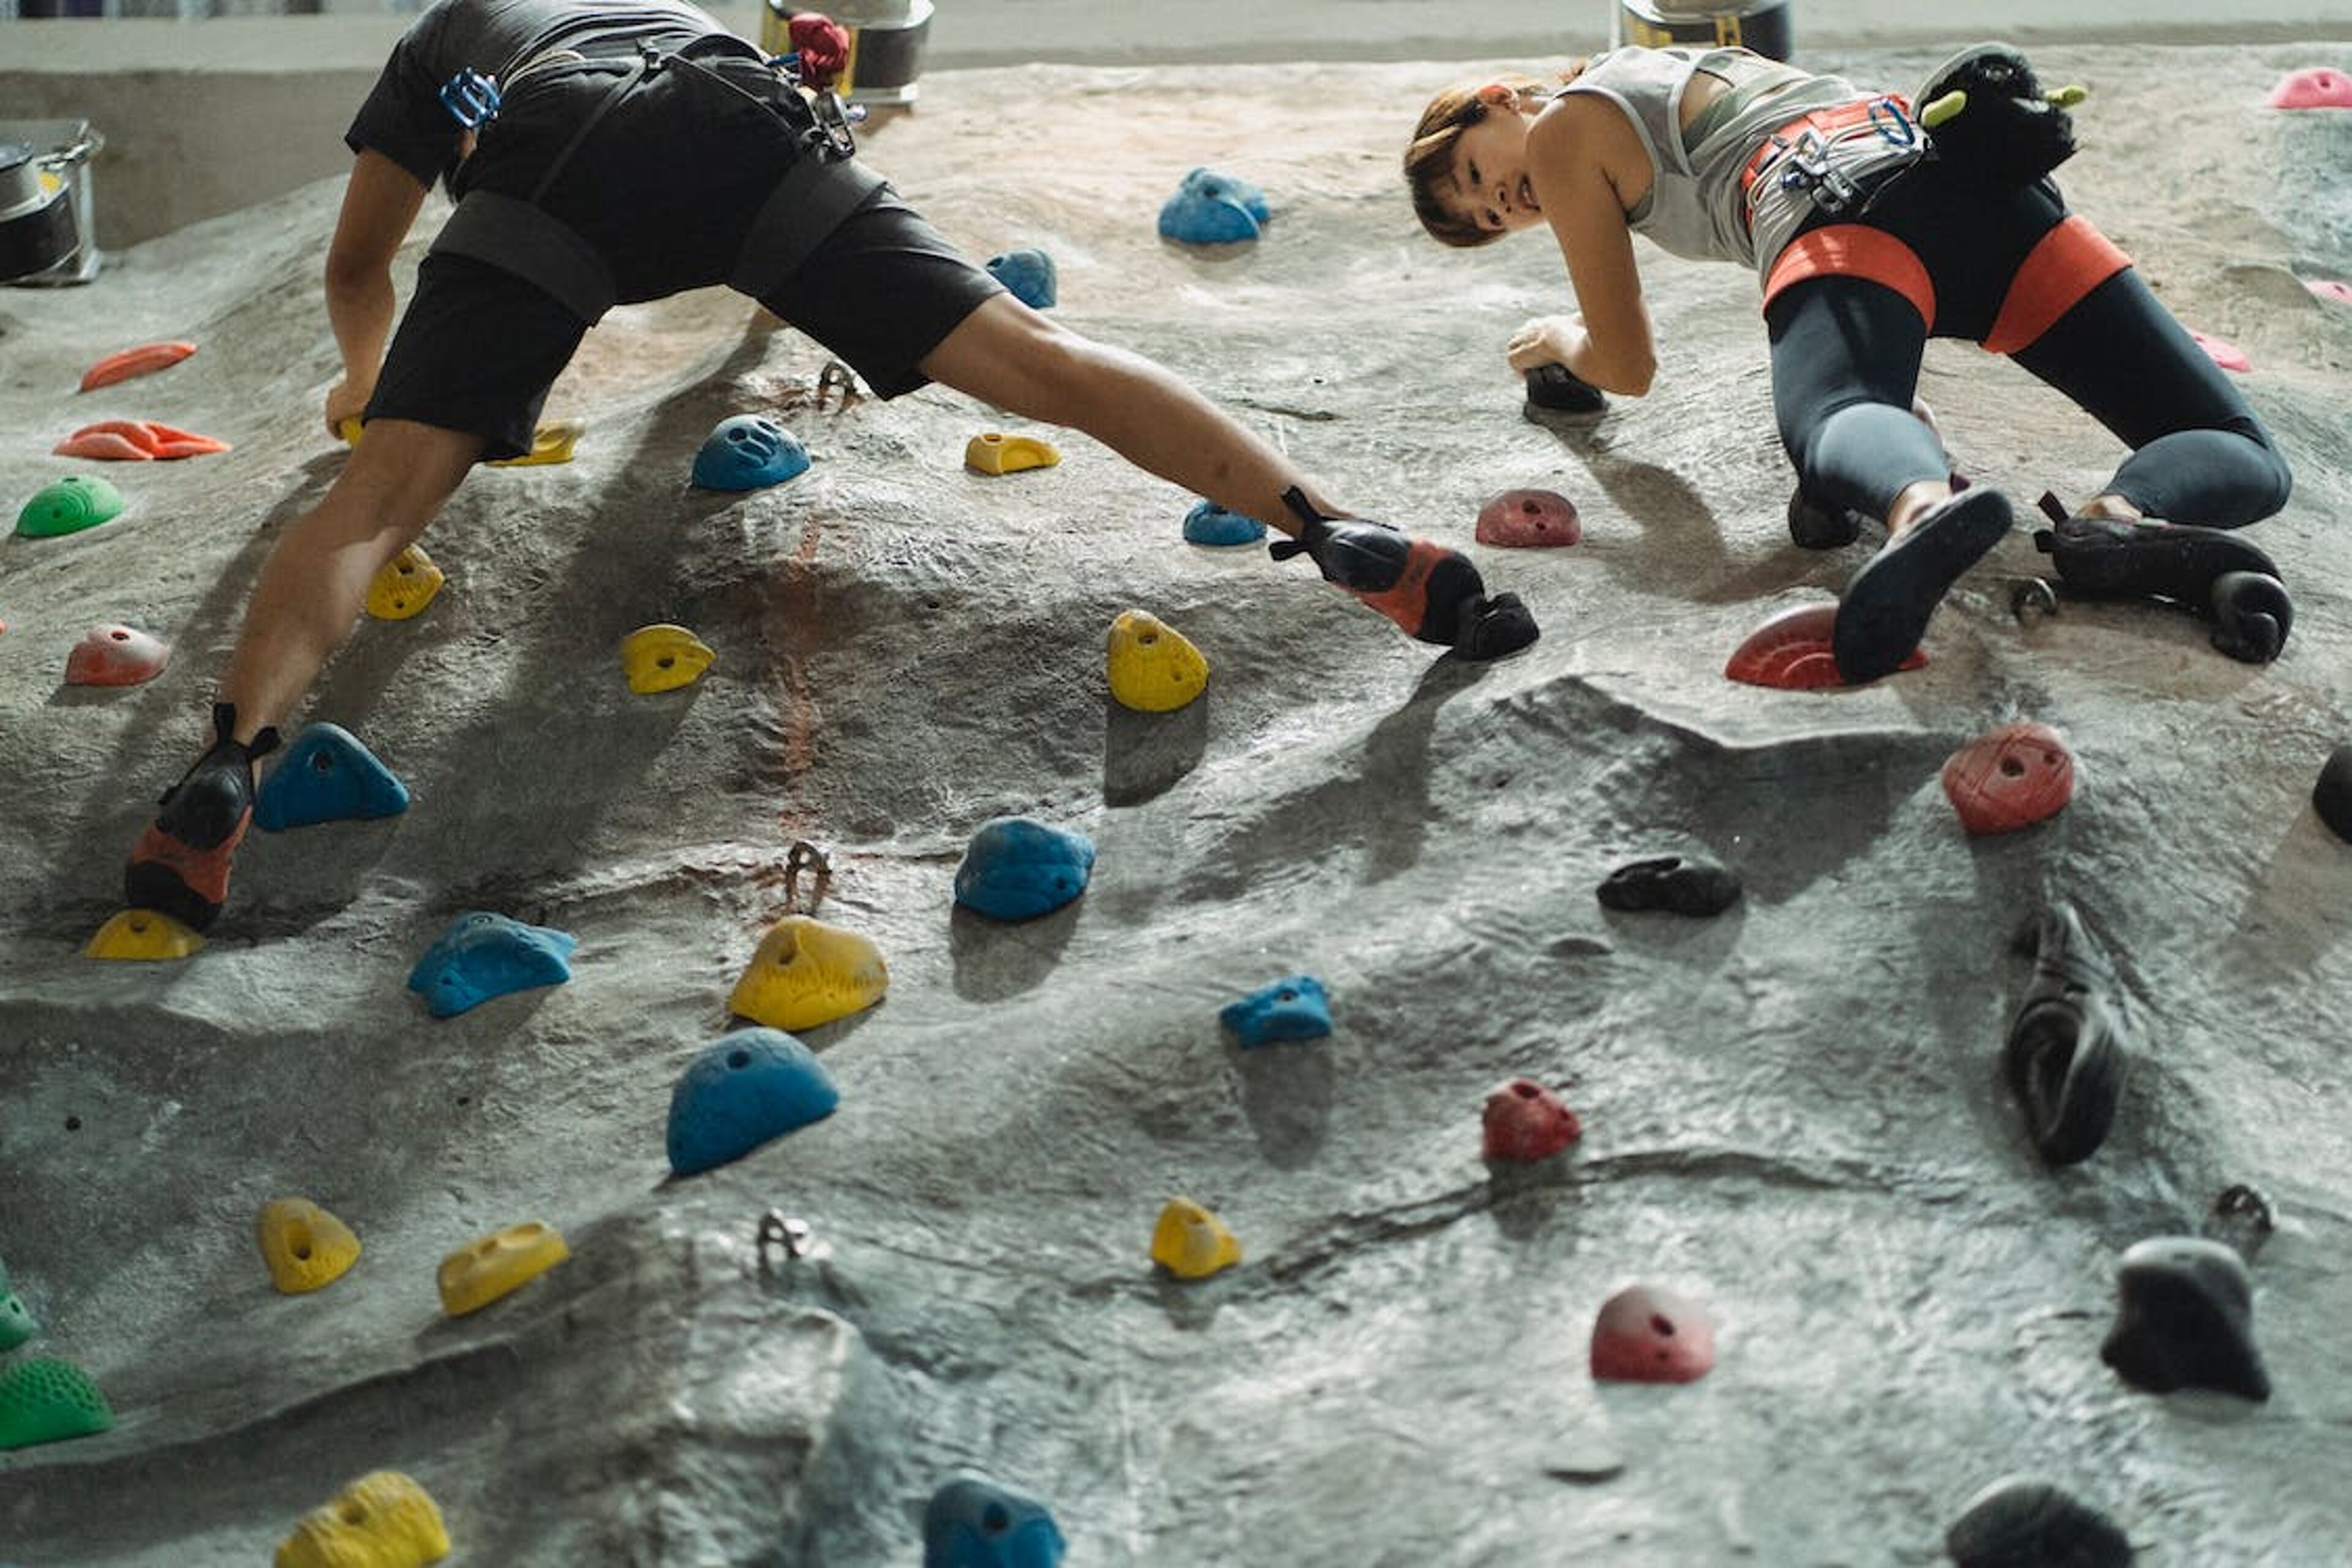 Two climbers practice on an artificial rock wall, using various holds to ascend, secured with harnesses.